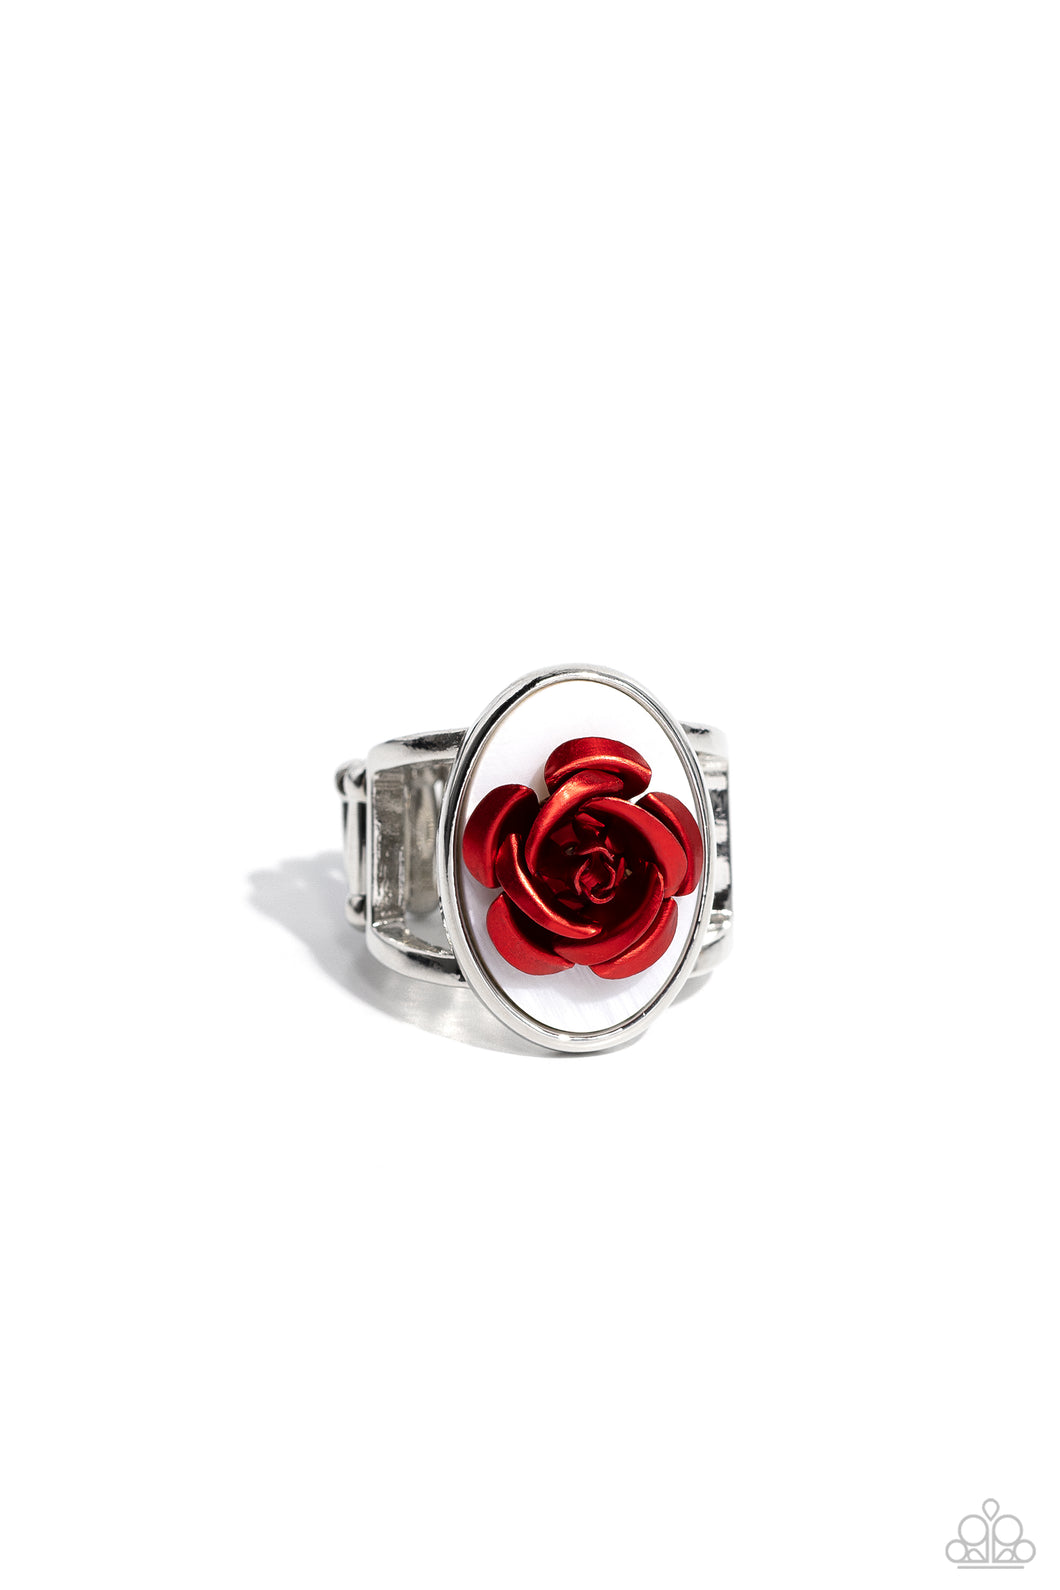 Paparazzi - “ROSE to My Heart” Red Stretch Ring